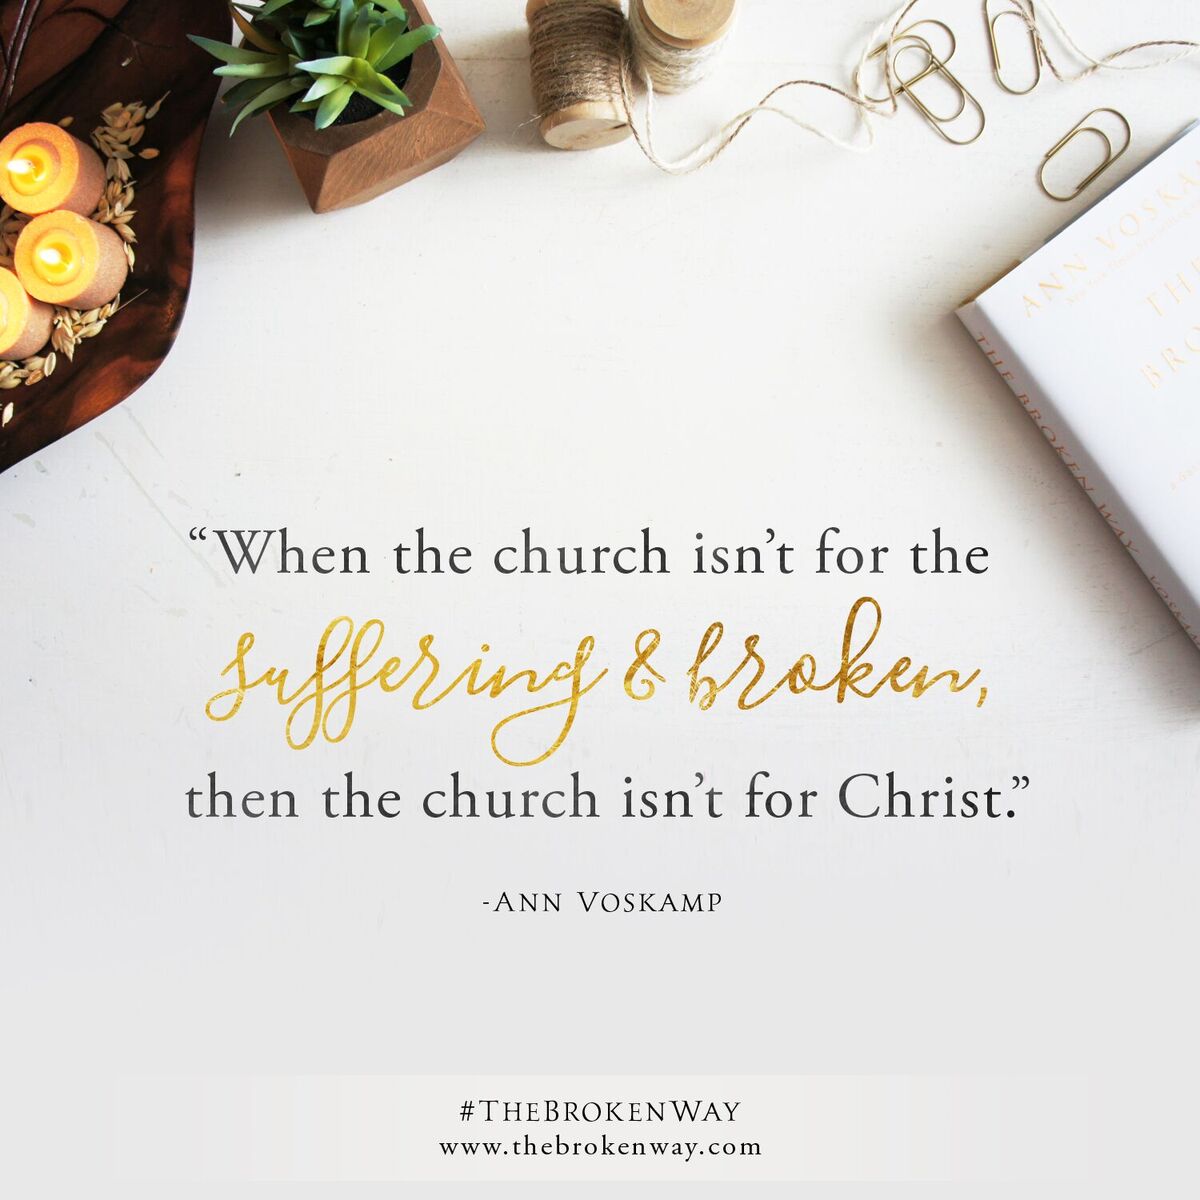 Ann Voskamp On Twitter: "When The Church Isn't For The Suffering And Broken Then The Church Isn't For Christ. Https://T.co/Jc0Rzjydjc #Thebrokenway : Releases Today Https://T.co/12Yabll0Yl" / Twitter